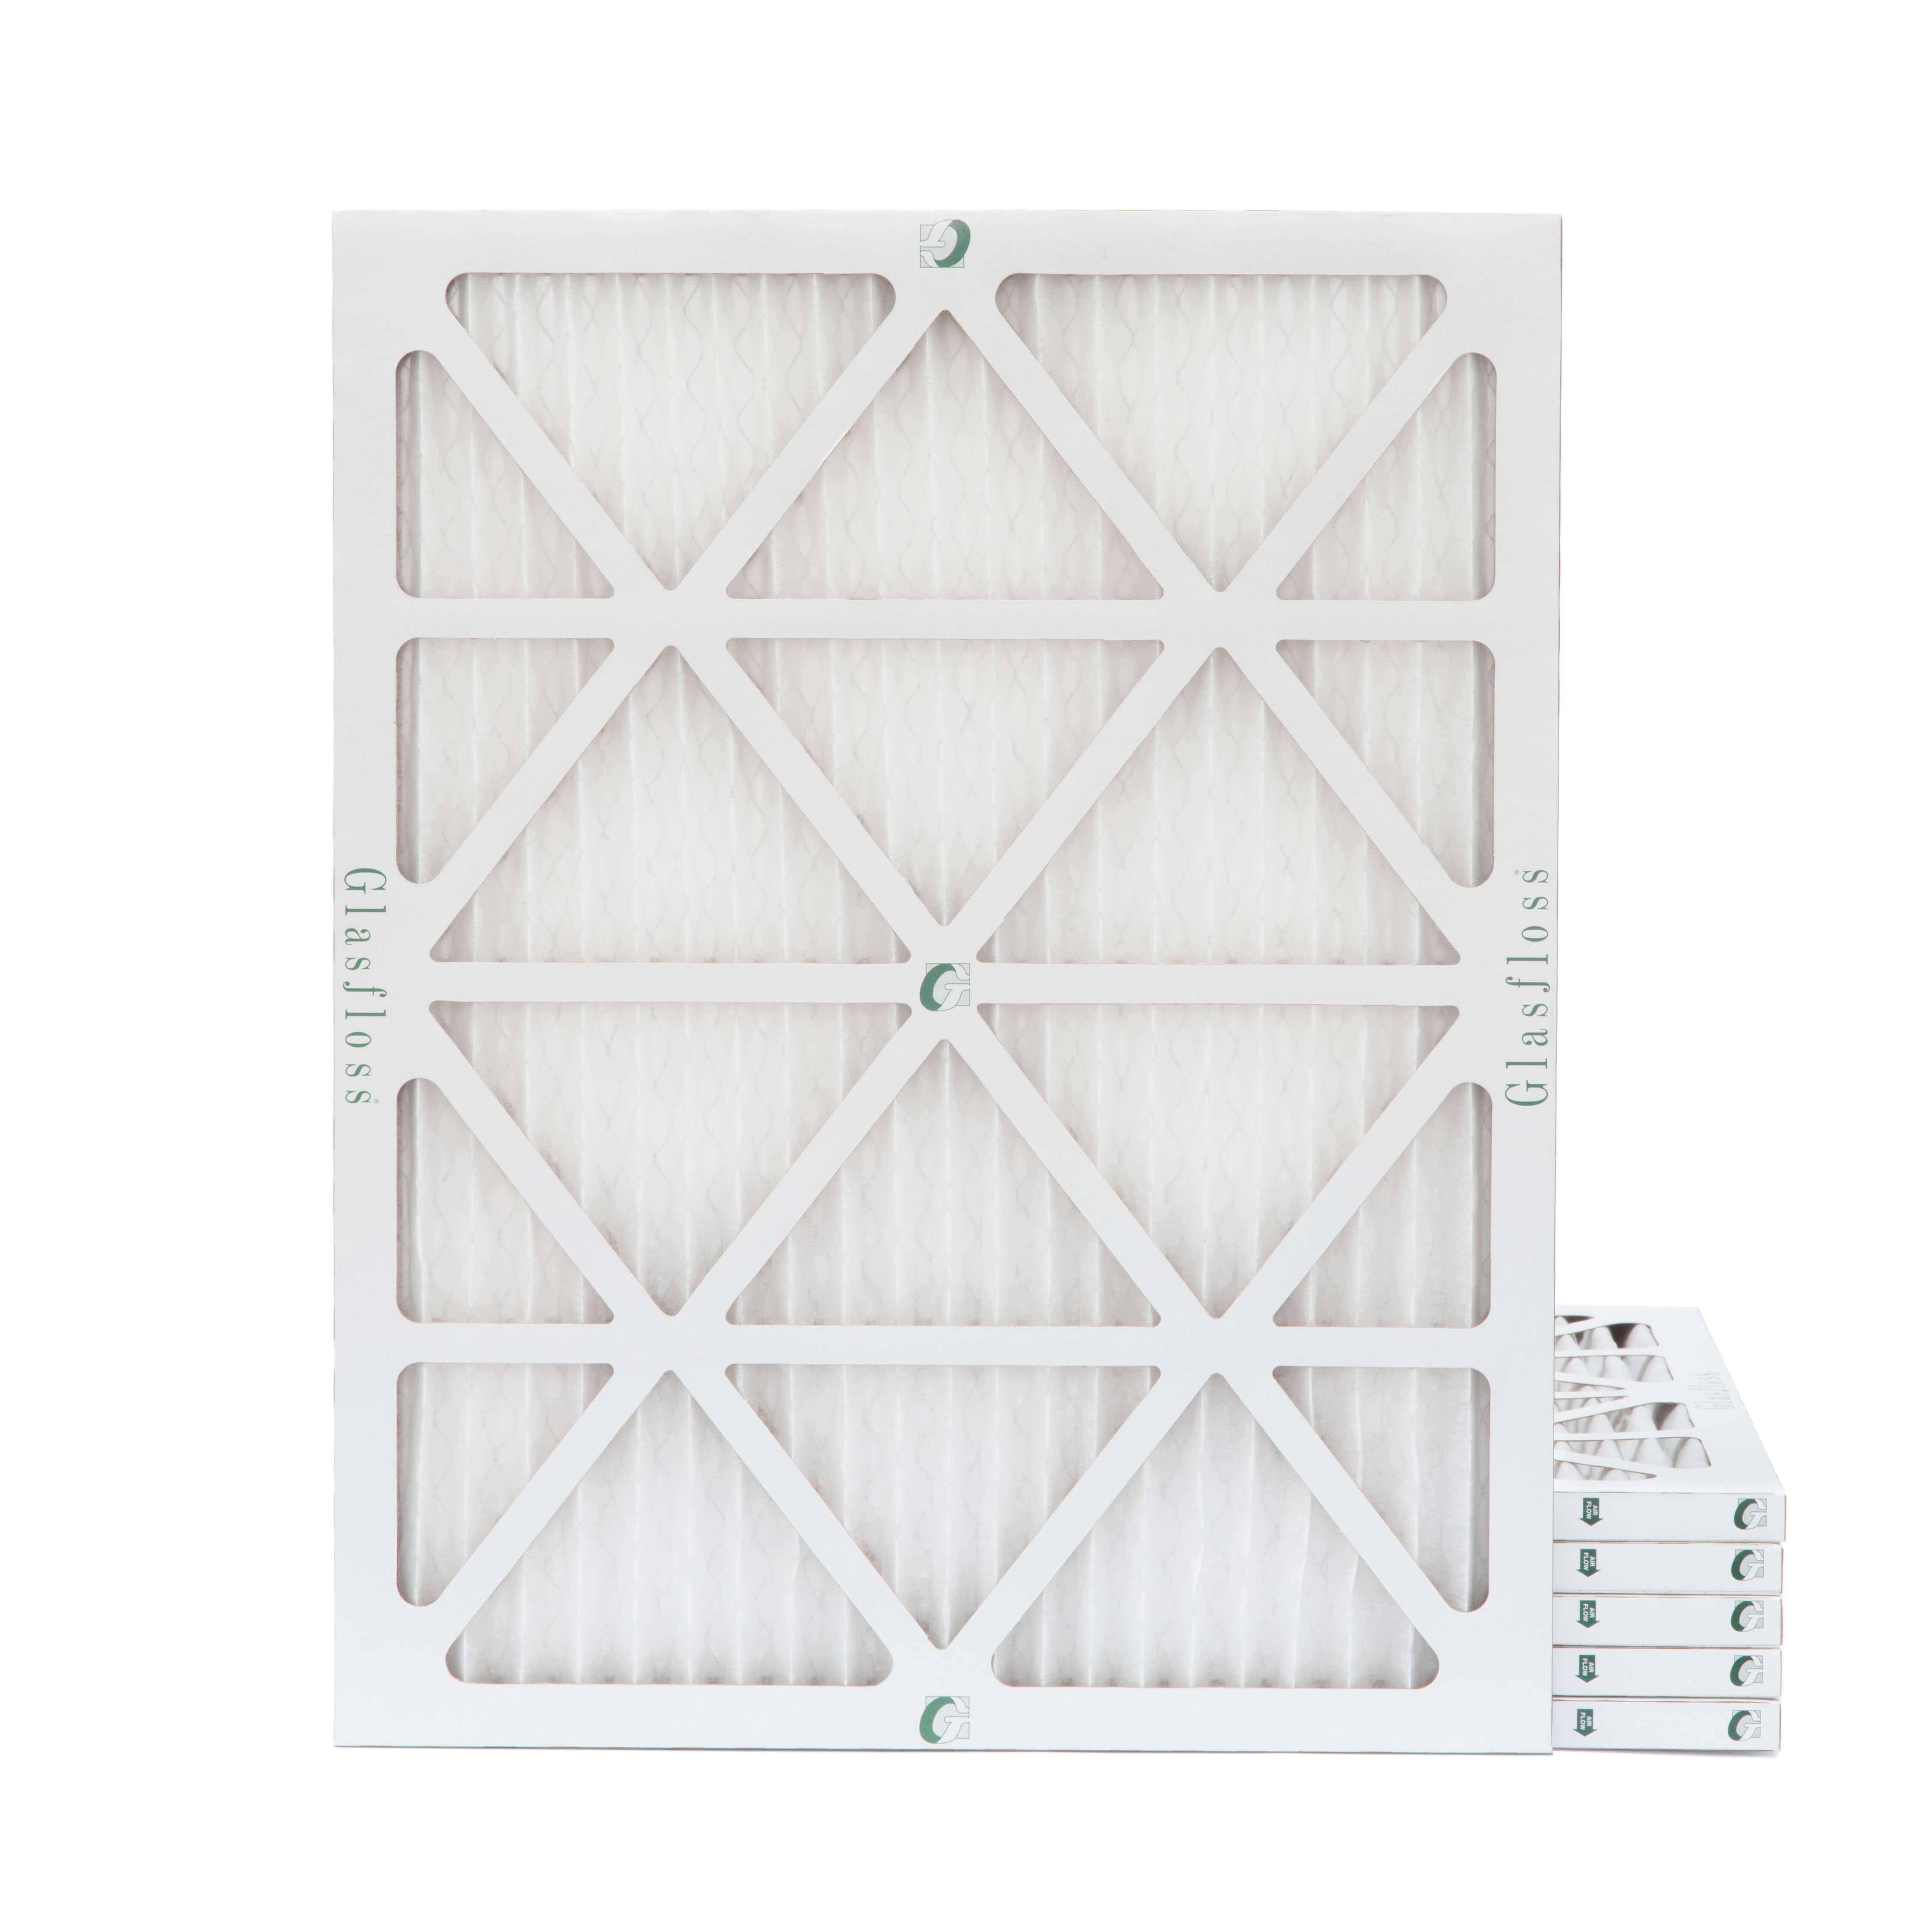 Qty:6 - Pleated  Air Furnace Filter  Made in USA Glasfloss 15x20x1 MERV 10 - 